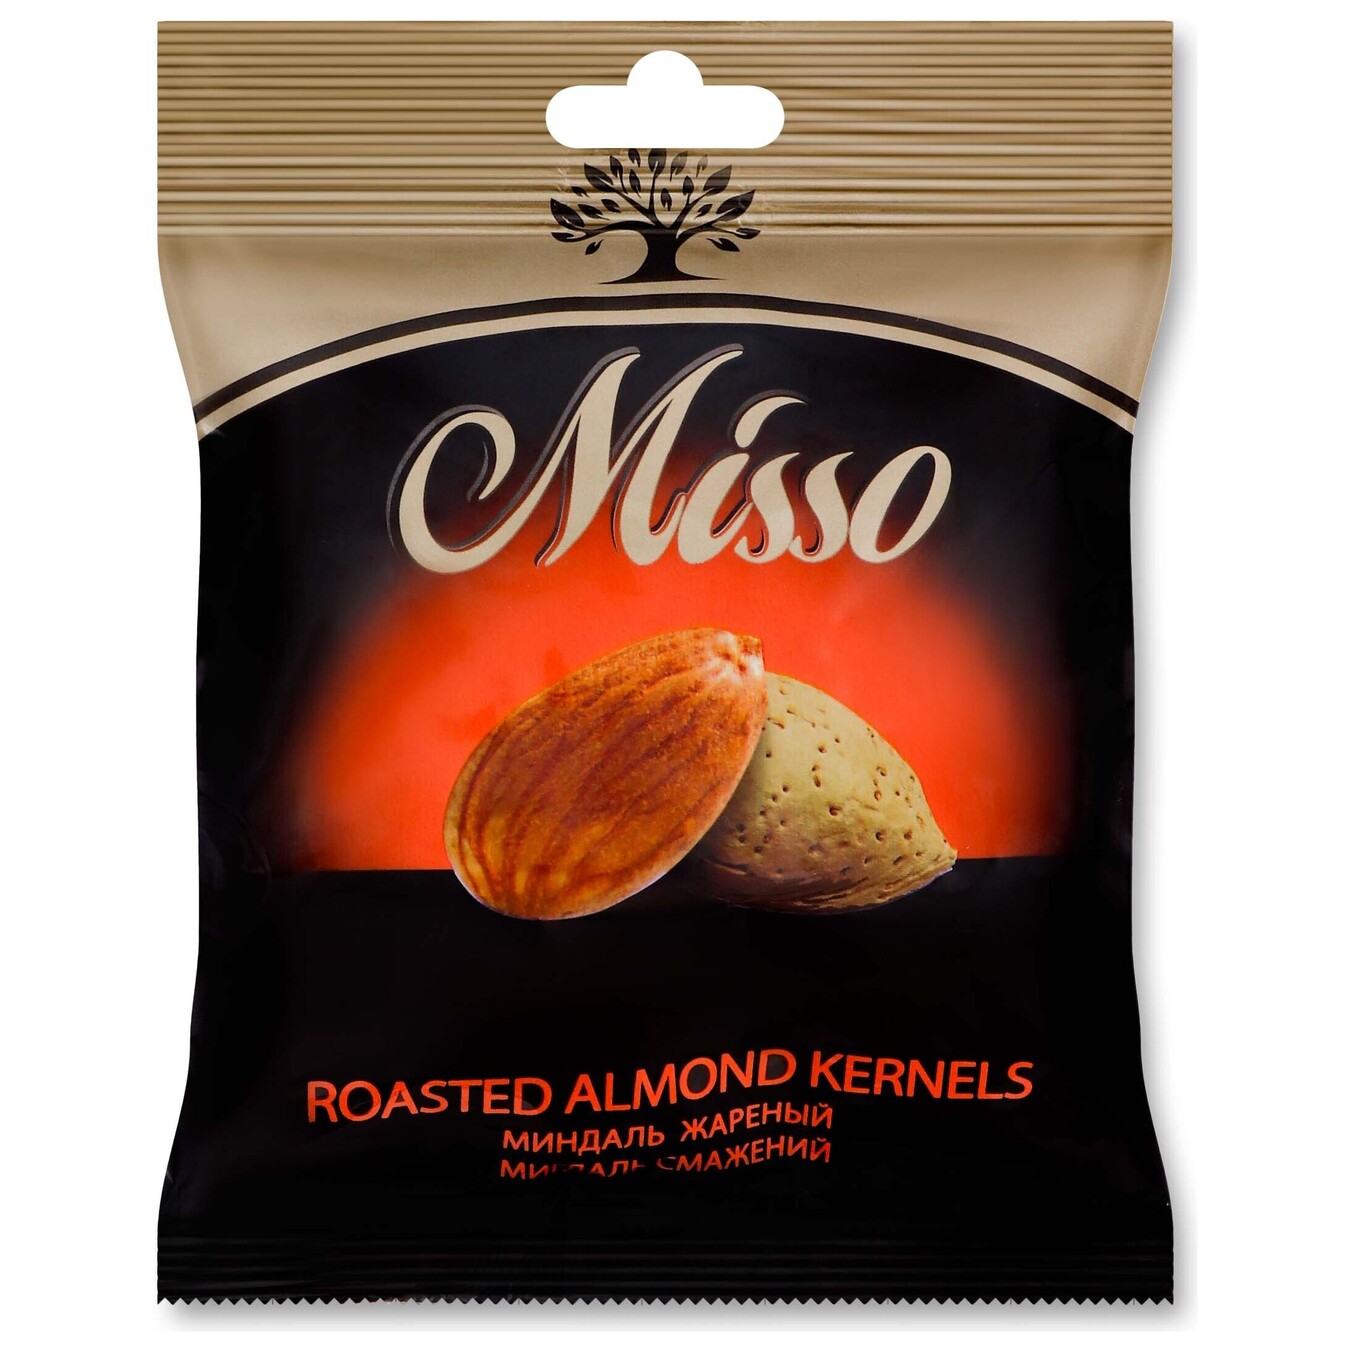 Misso roasted almonds 75g